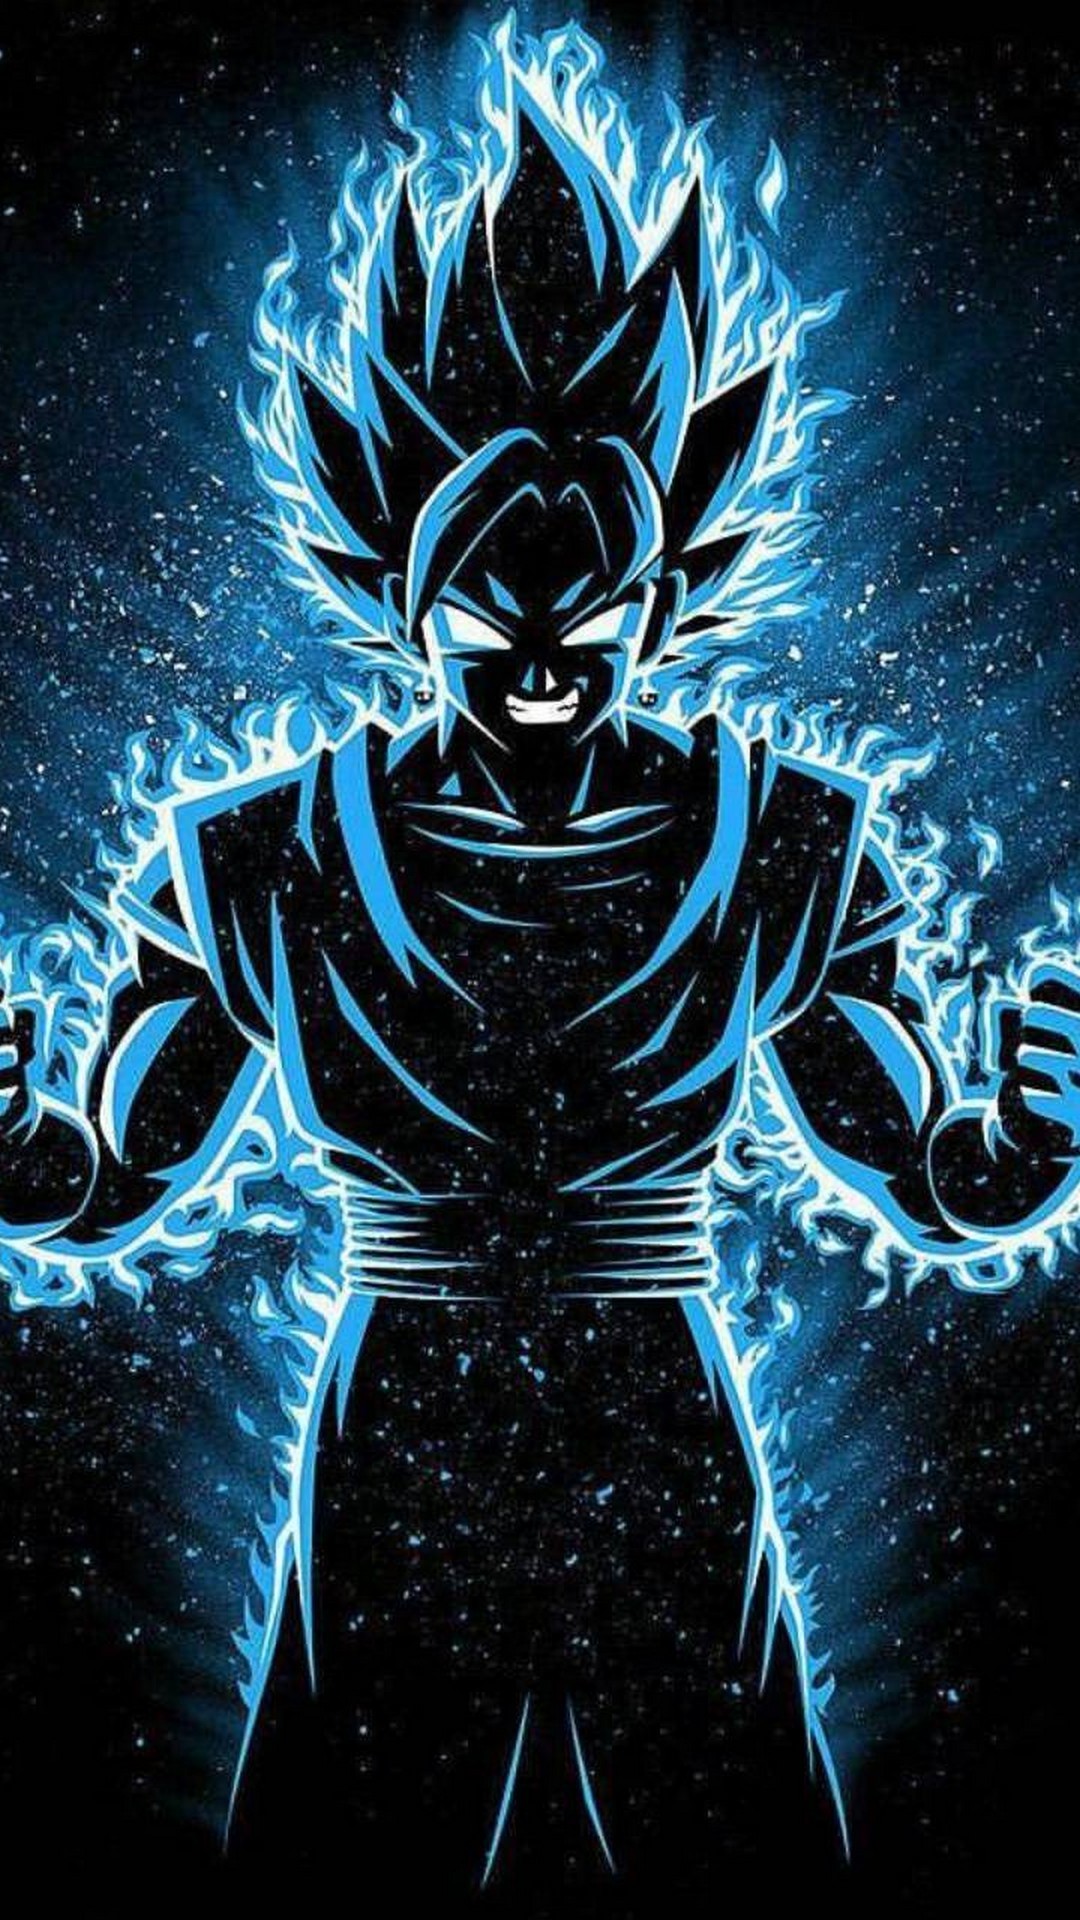 goku wallpaper 3d,fictional character,anime,graphic design,darkness,space